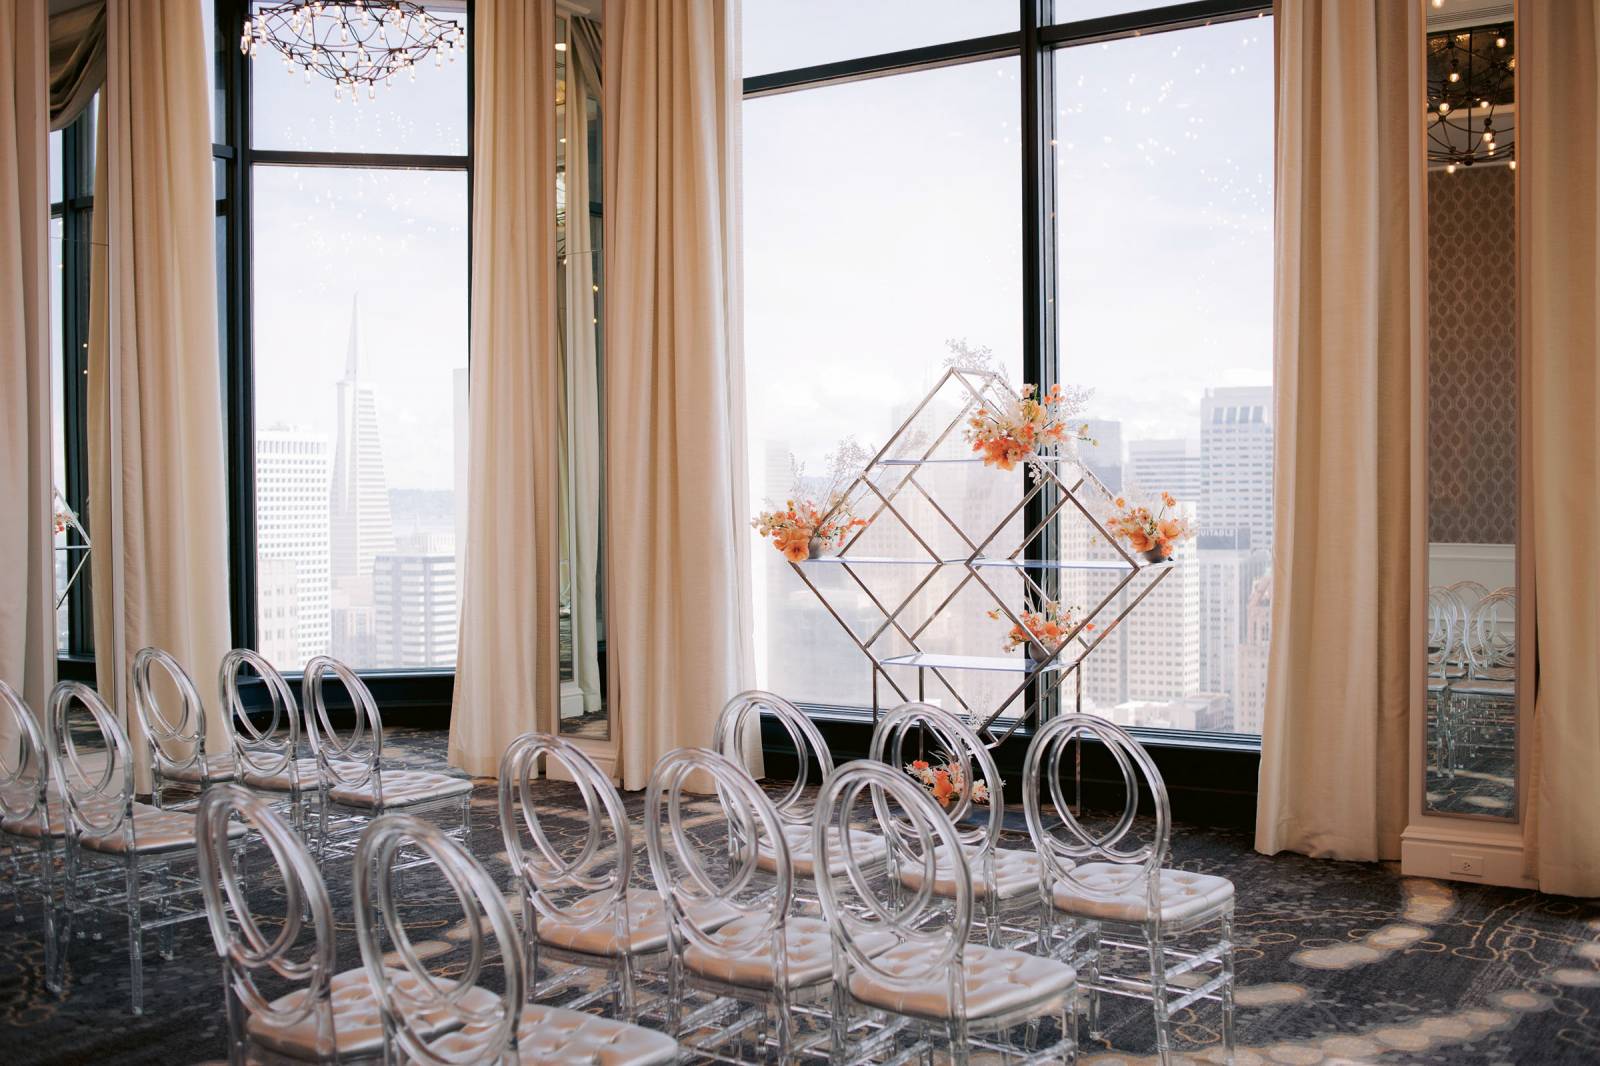 Ceremony setting with acrylic chairs and geometric chrome ceremony prop